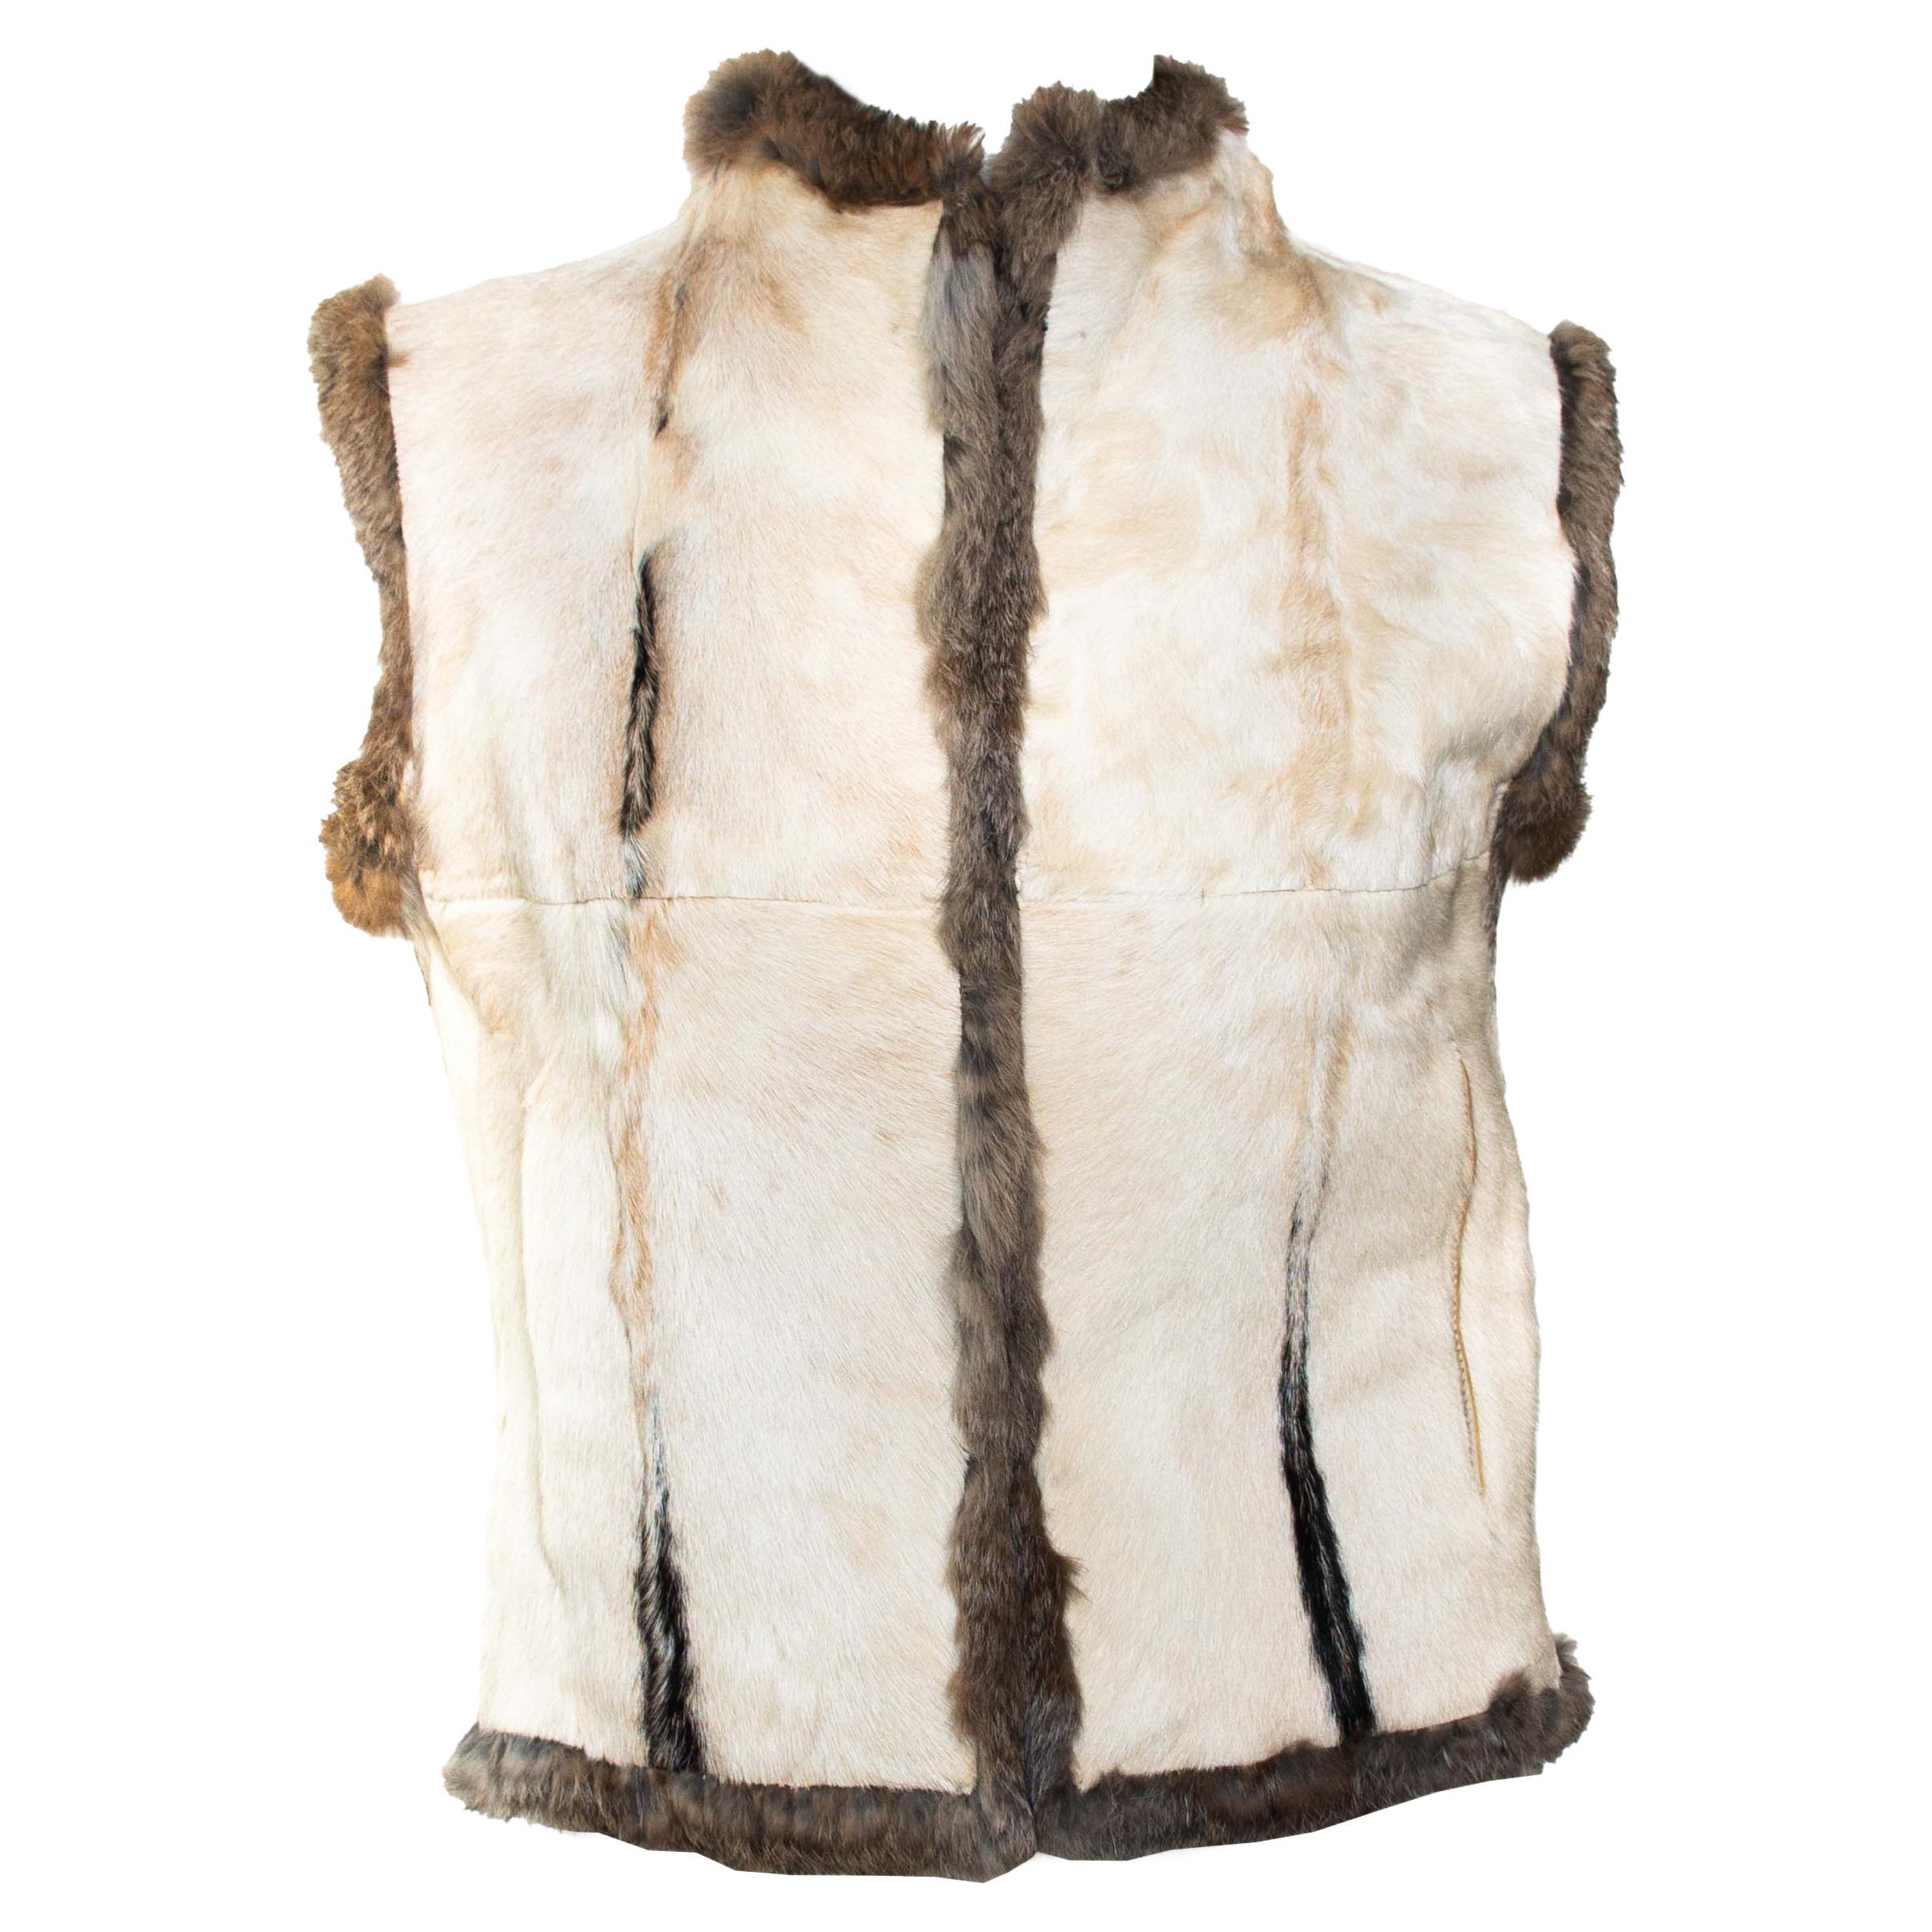 F/W 1999 Gucci by Tom Ford Calf Hair Reversible Rabbit Fur Vest 